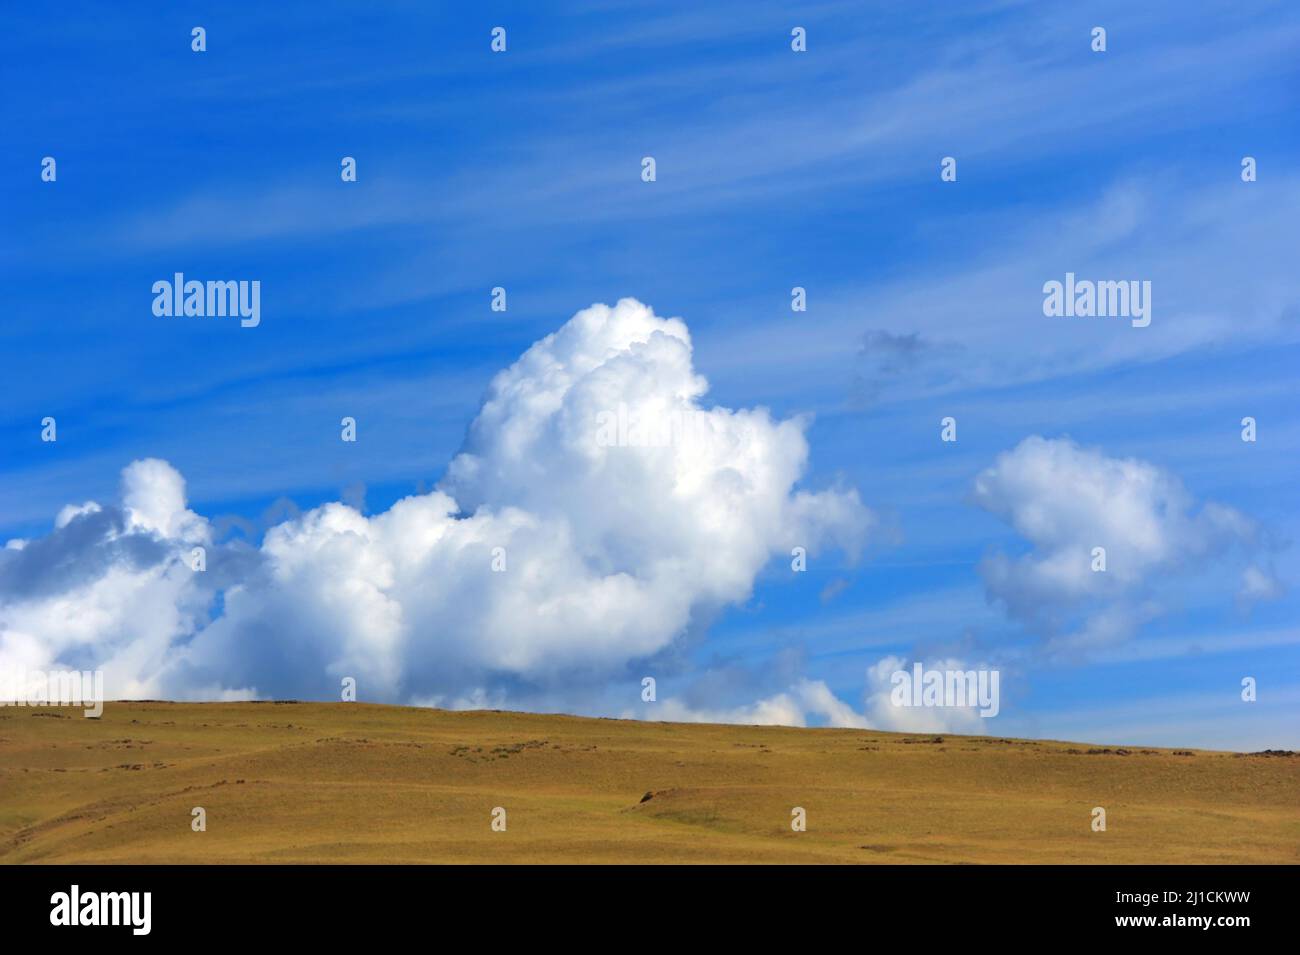 Background image shows horizon and the 'Big Sky' country or Montana.  Cloud bank sits on vivid blue sky. Stock Photo